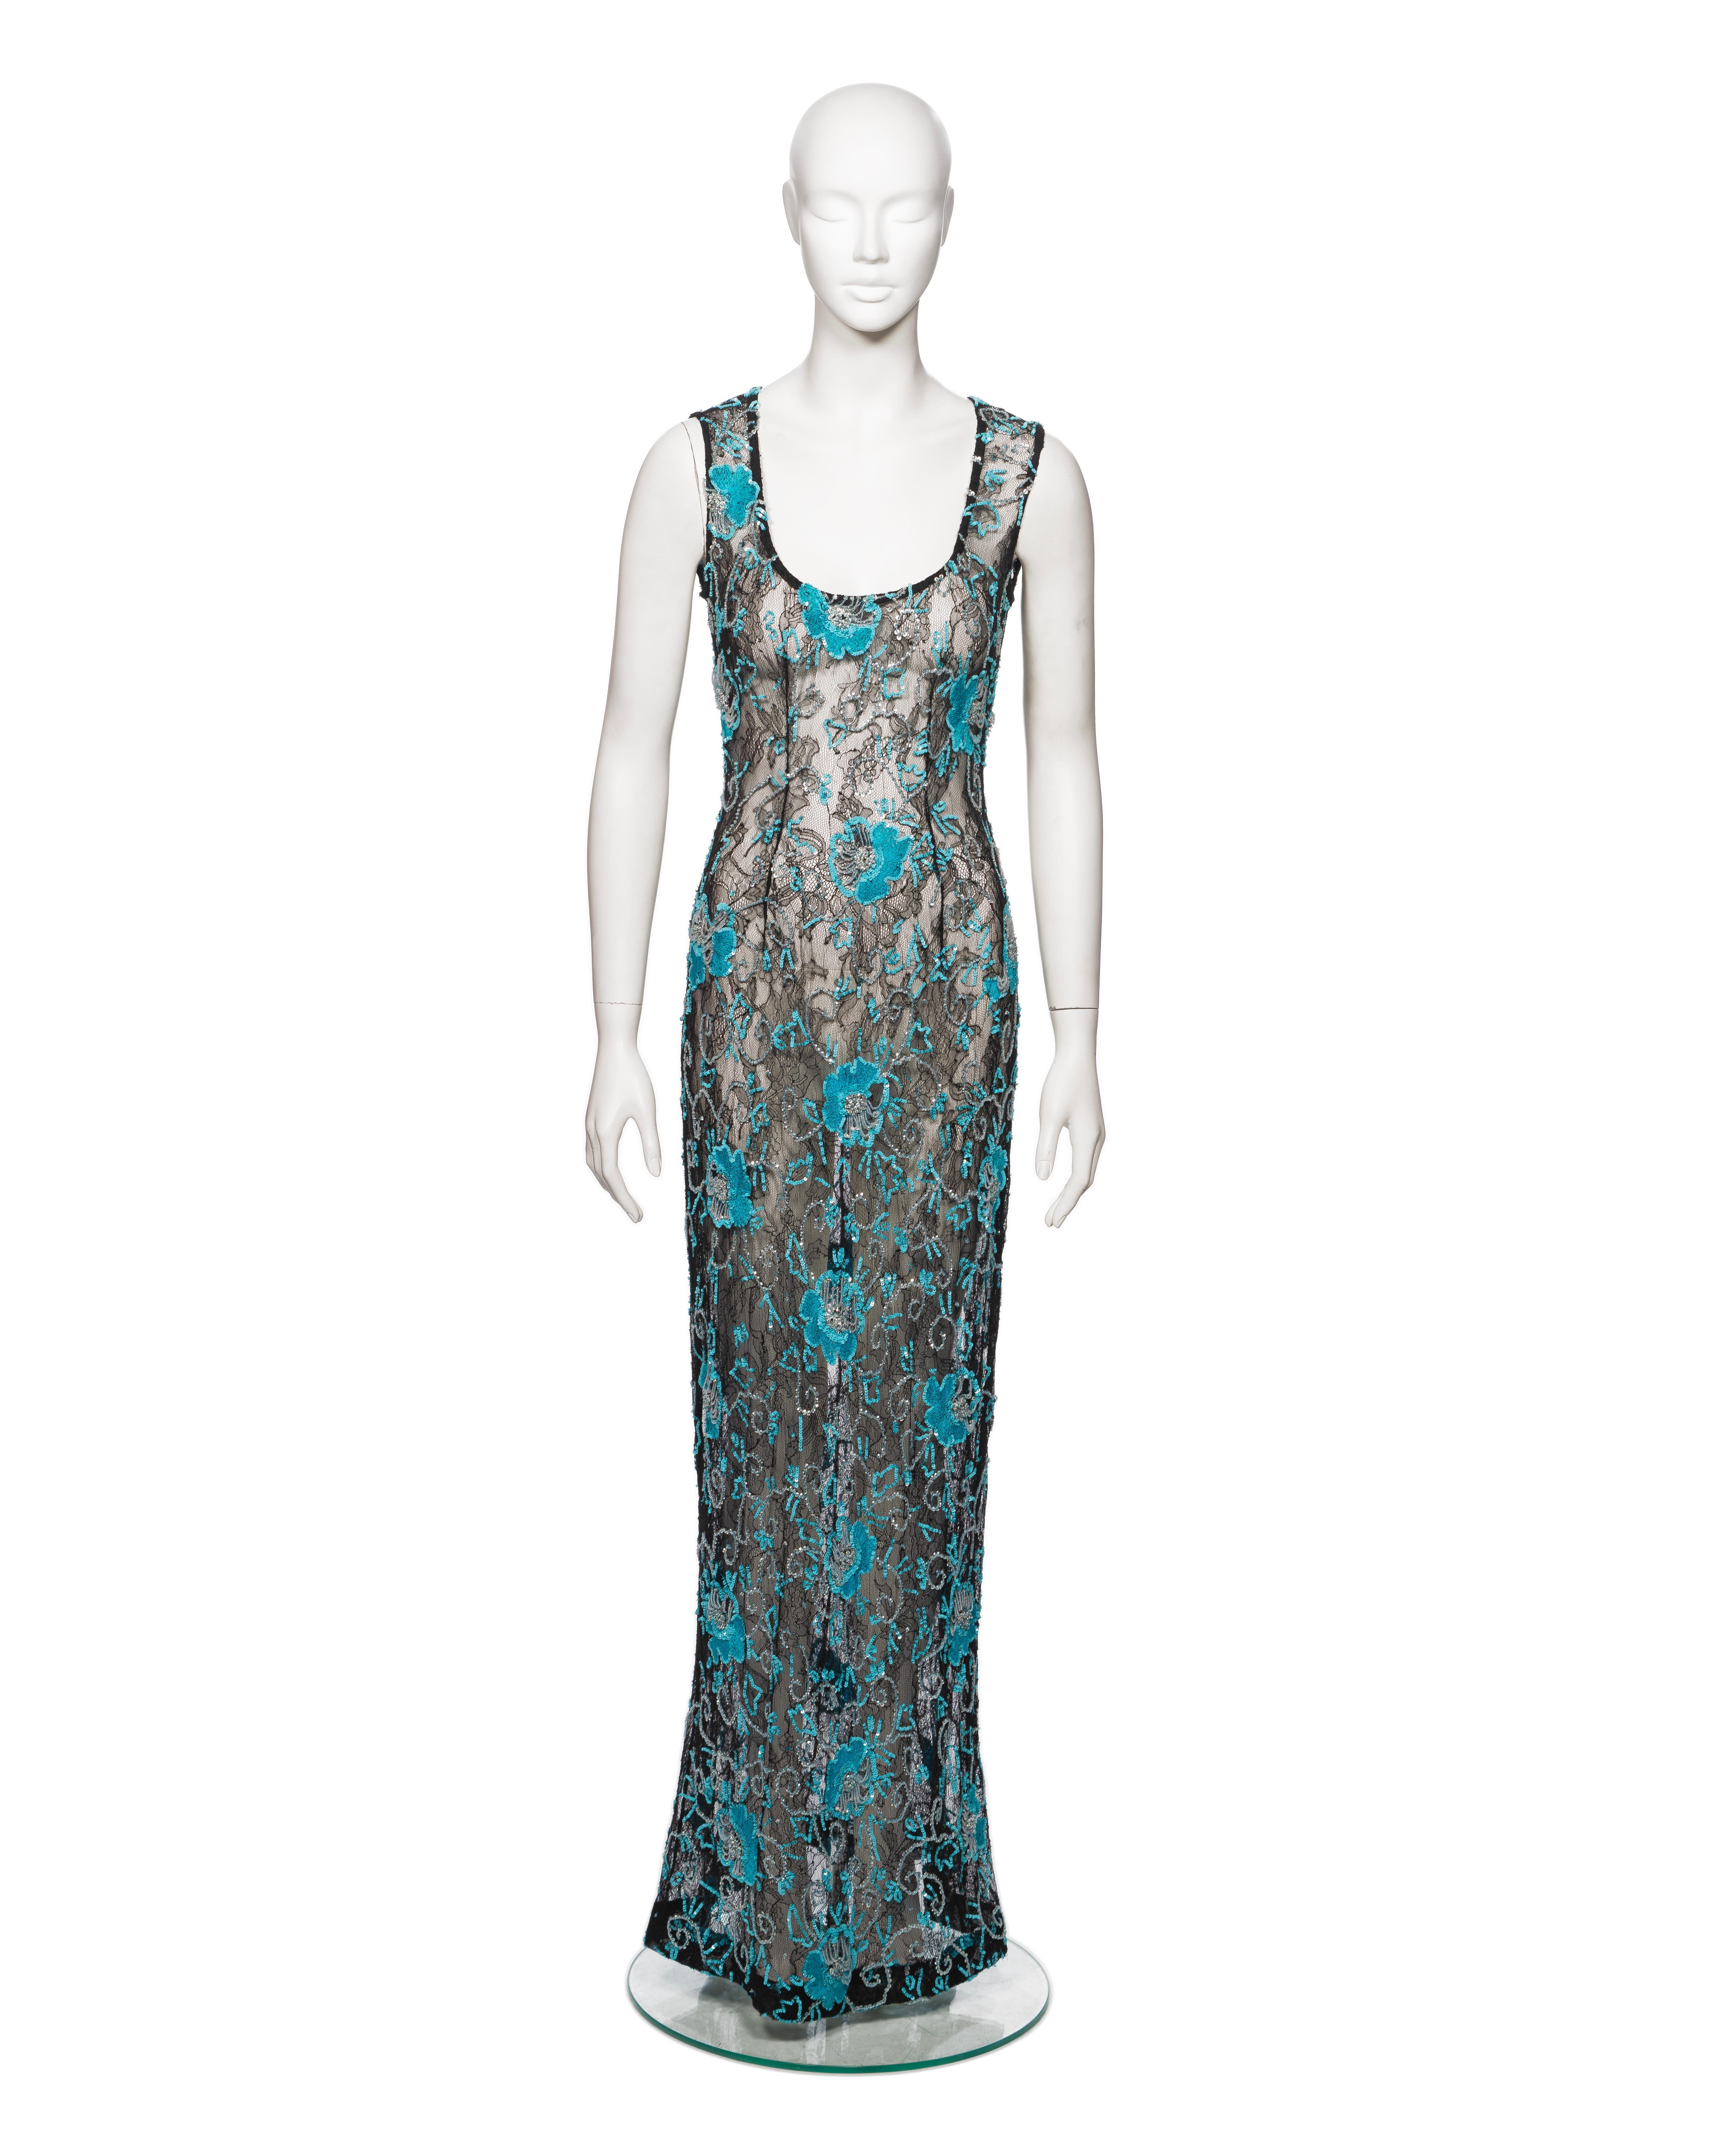 ▪ Brand: Dolce & Gabbana 
▪ Creative Director: Domenico Dolce and Stefano Gabbana
▪ Collection: Fall-Winter 1999
▪ Sold by: One of a Kind Archive
▪ Fabric: Black Lace
▪ Details: Blue floral embroidery and embellishments
▪ Size: Approx. IT40 - FR36 -